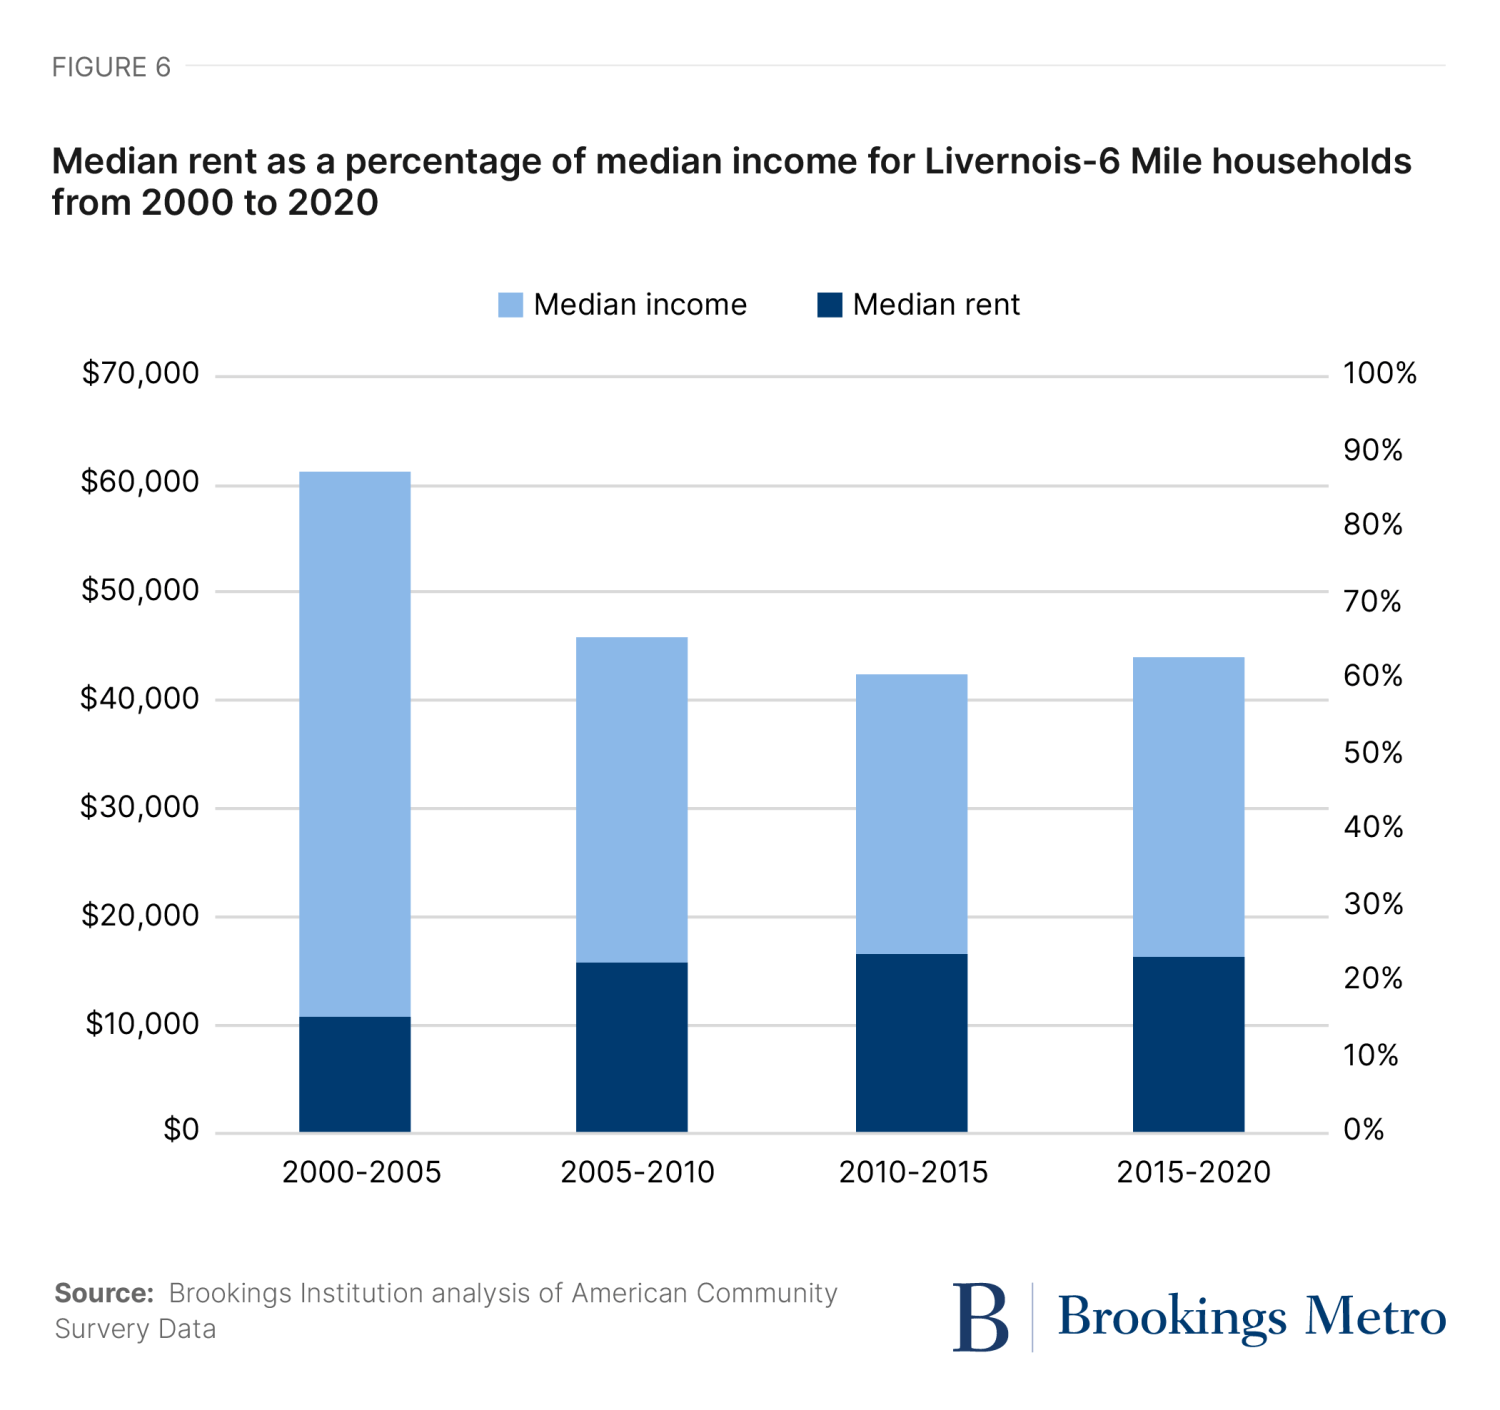 Figure 6. Median rent as a percentage of median income for Livernois-6 Mile households from 2000 to 2020